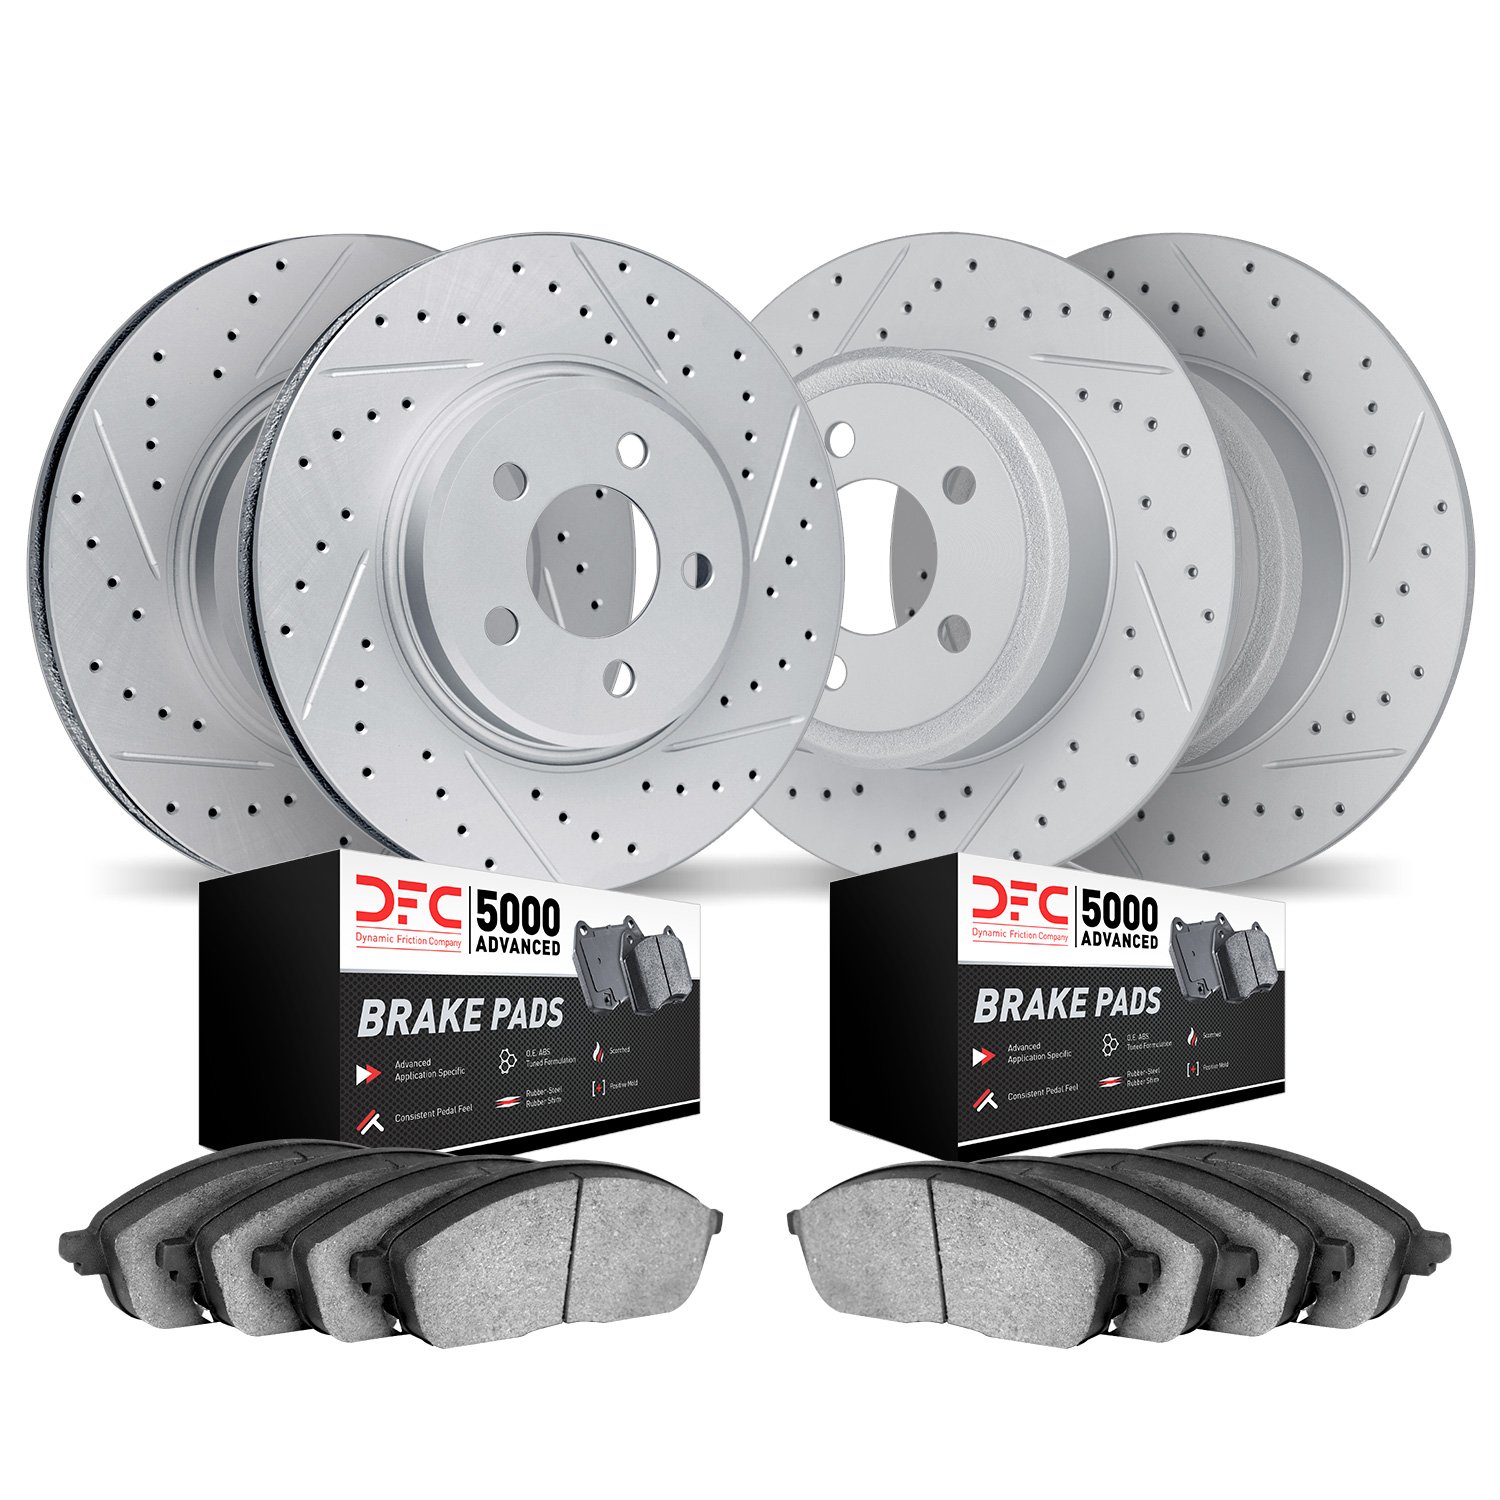 2504-45034 Geoperformance Drilled/Slotted Rotors w/5000 Advanced Brake Pads Kit, 2016-2020 GM, Position: Front and Rear